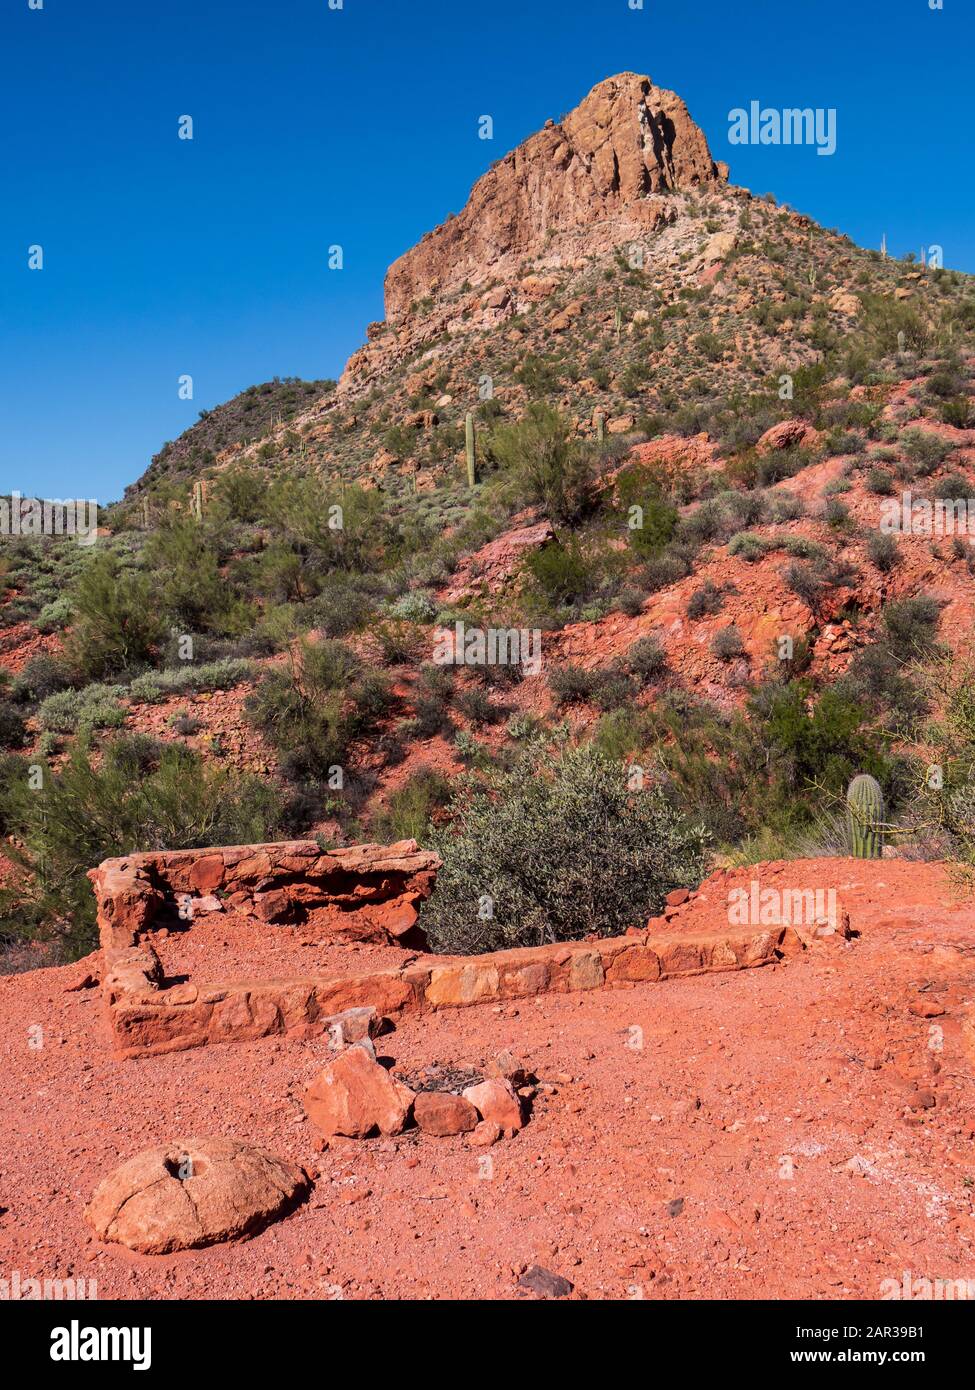 Remains of an abandoned miner's shack foundation probably constructed around 1956 by Ralph Morris, Indian Paint Mine, Superstition Wilderness, Arizona. Stock Photo